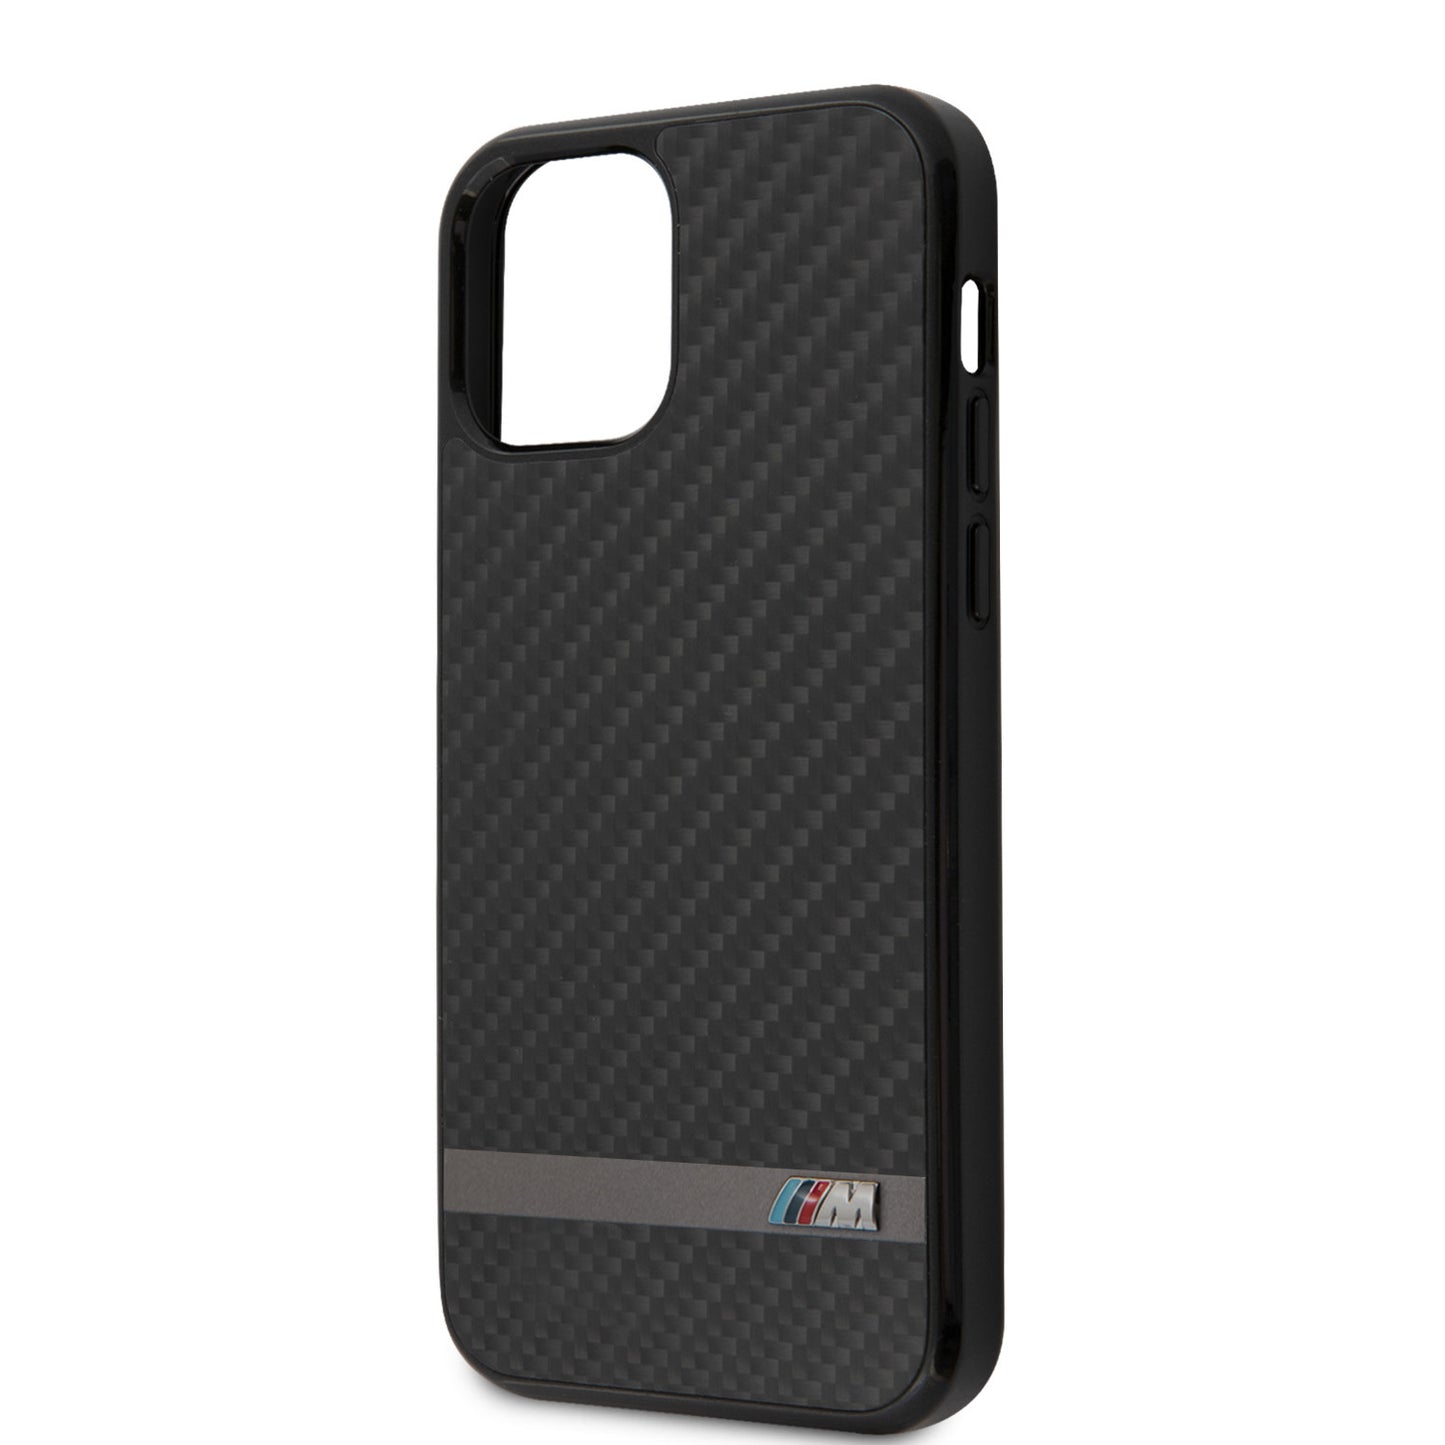 BMW iPhone 12 PRO MAX Backcover - Carbon - Zwart